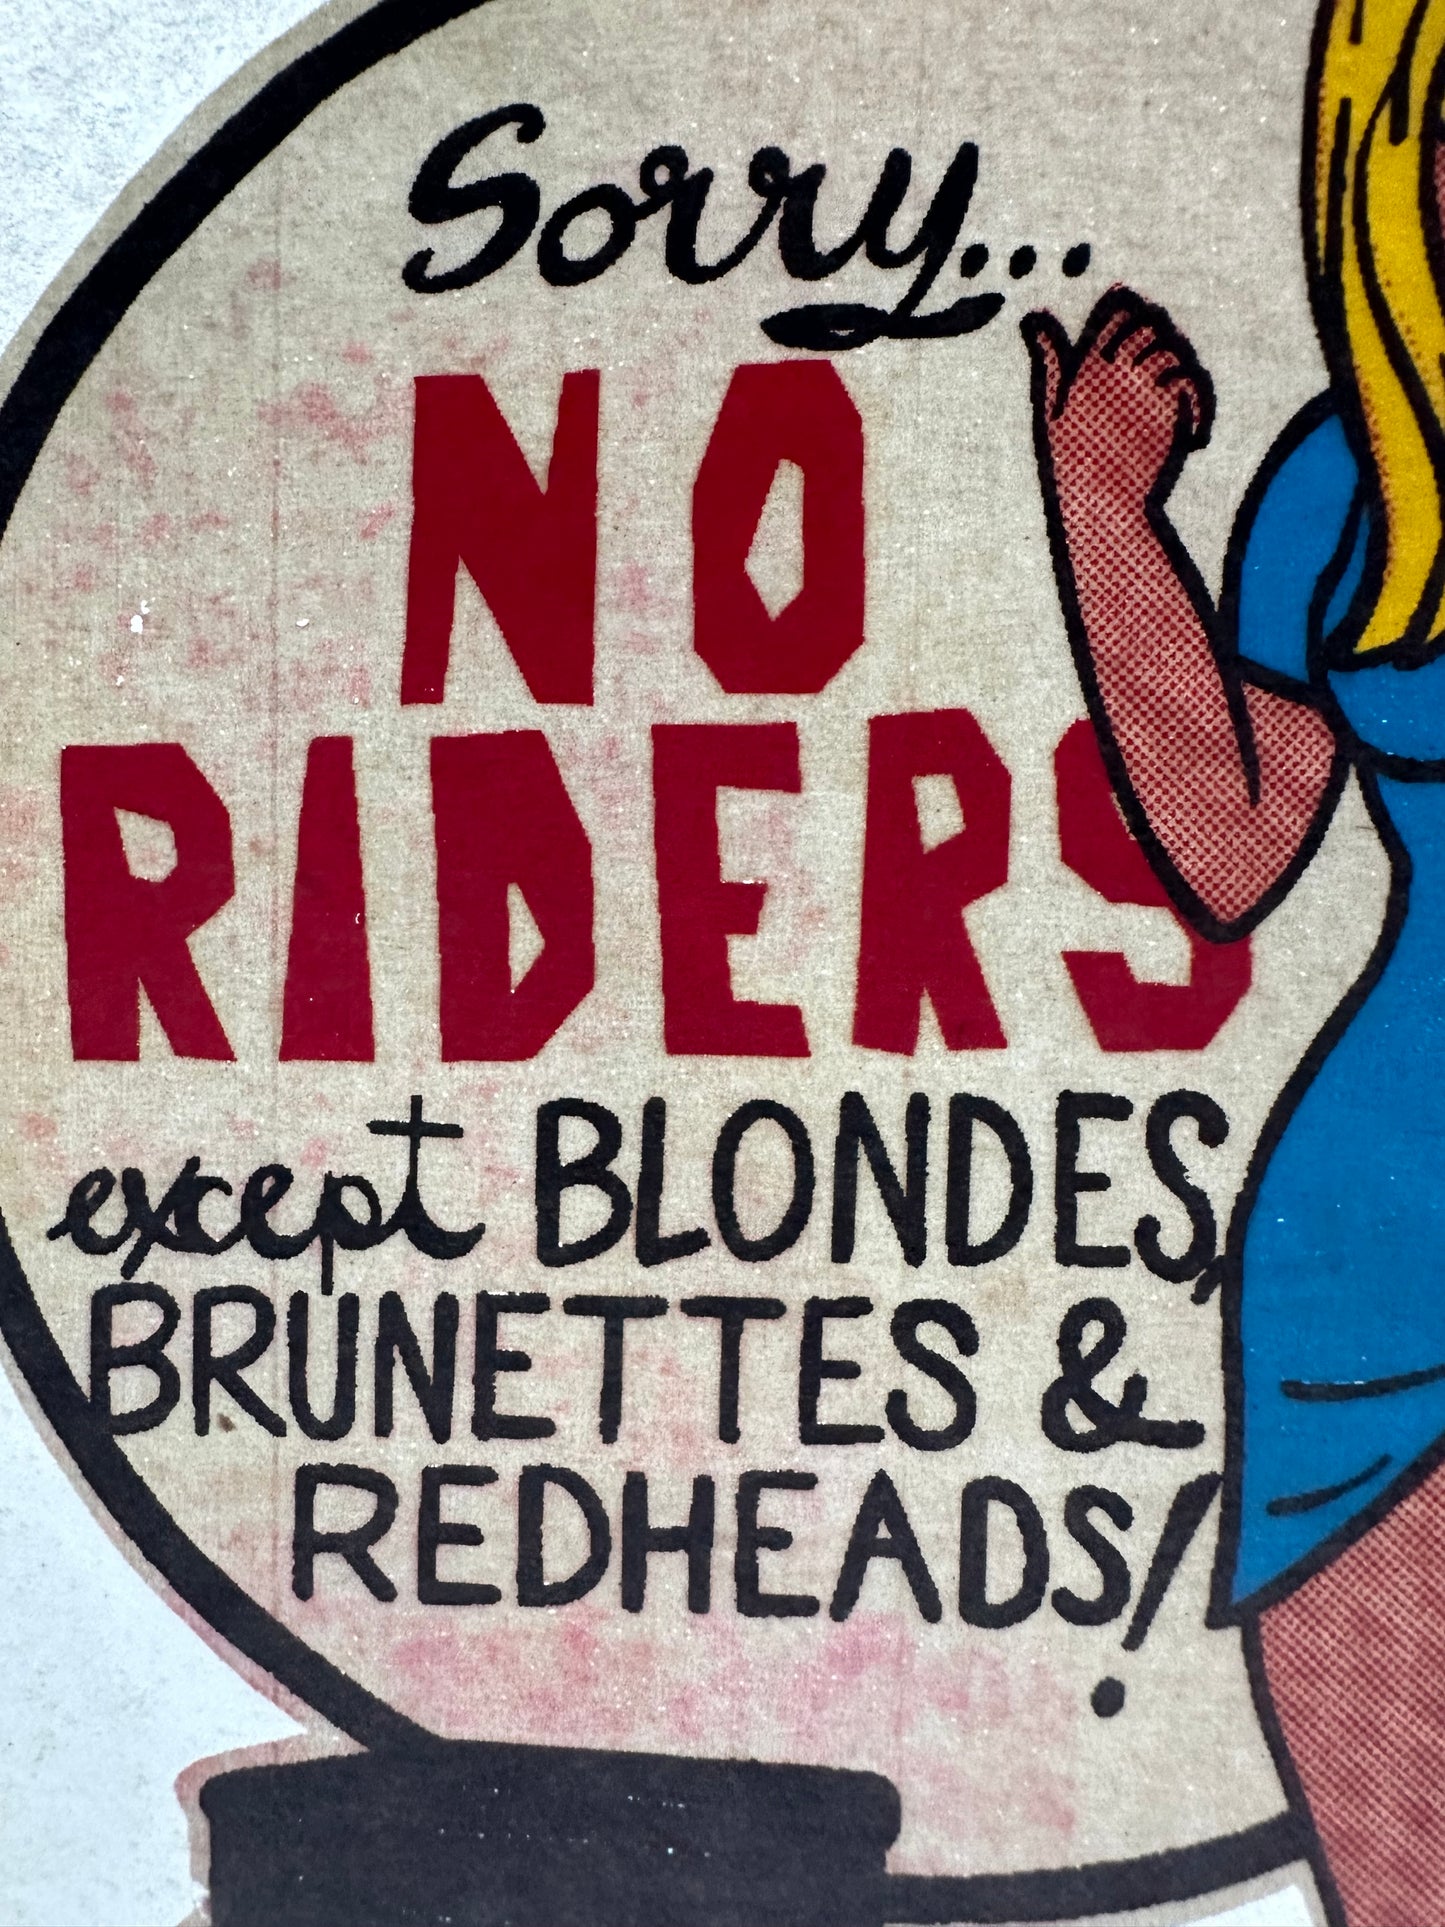 Sorry...No Riders Except Blondes, Brunettes, & Redheads! Vintage Iron On Heat Transfer